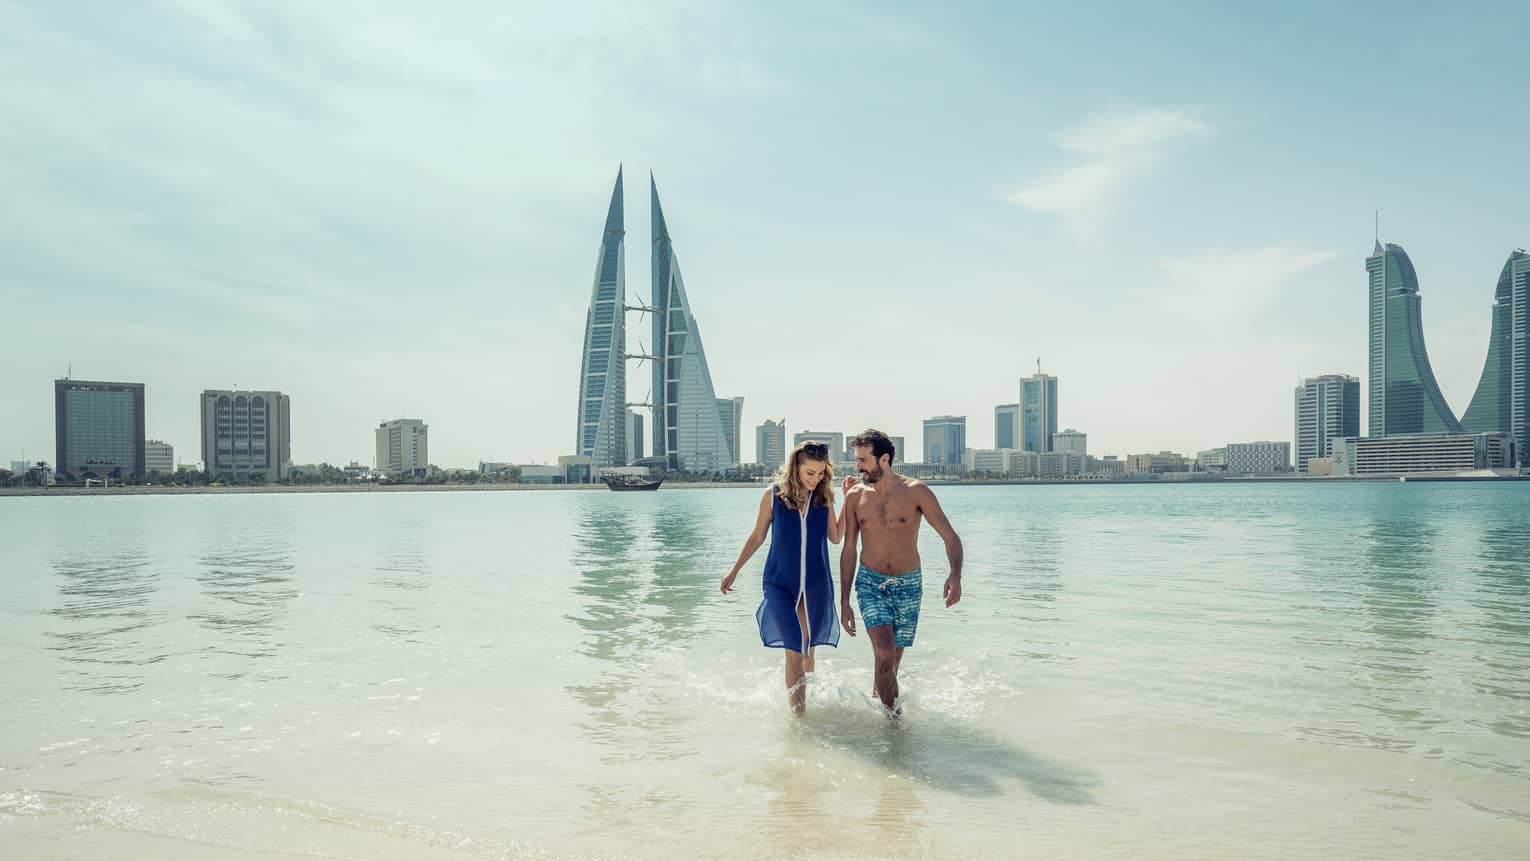 A man and woman run arm in arm through the shallow ocean water with Bahrain Bay skyscrapers in the background